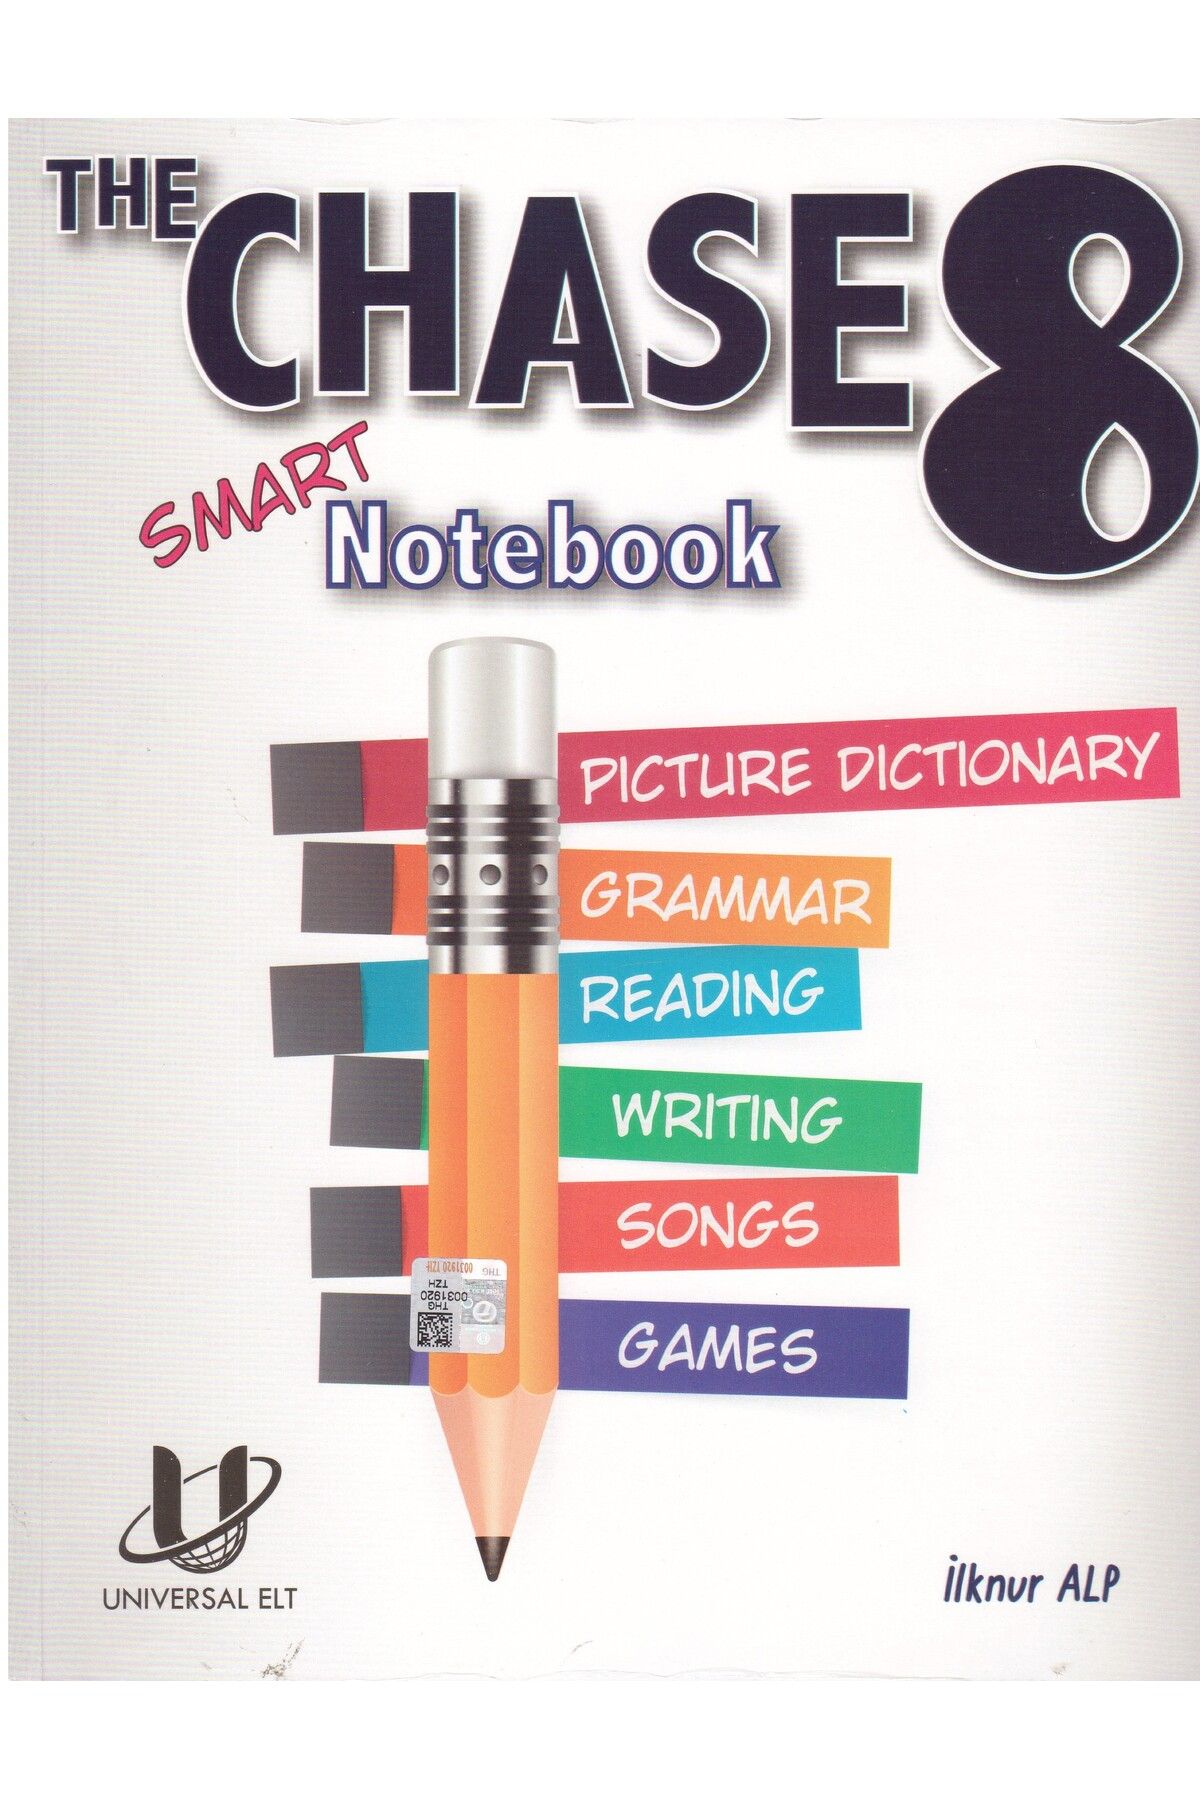 Universal The Chase 8 Notebook